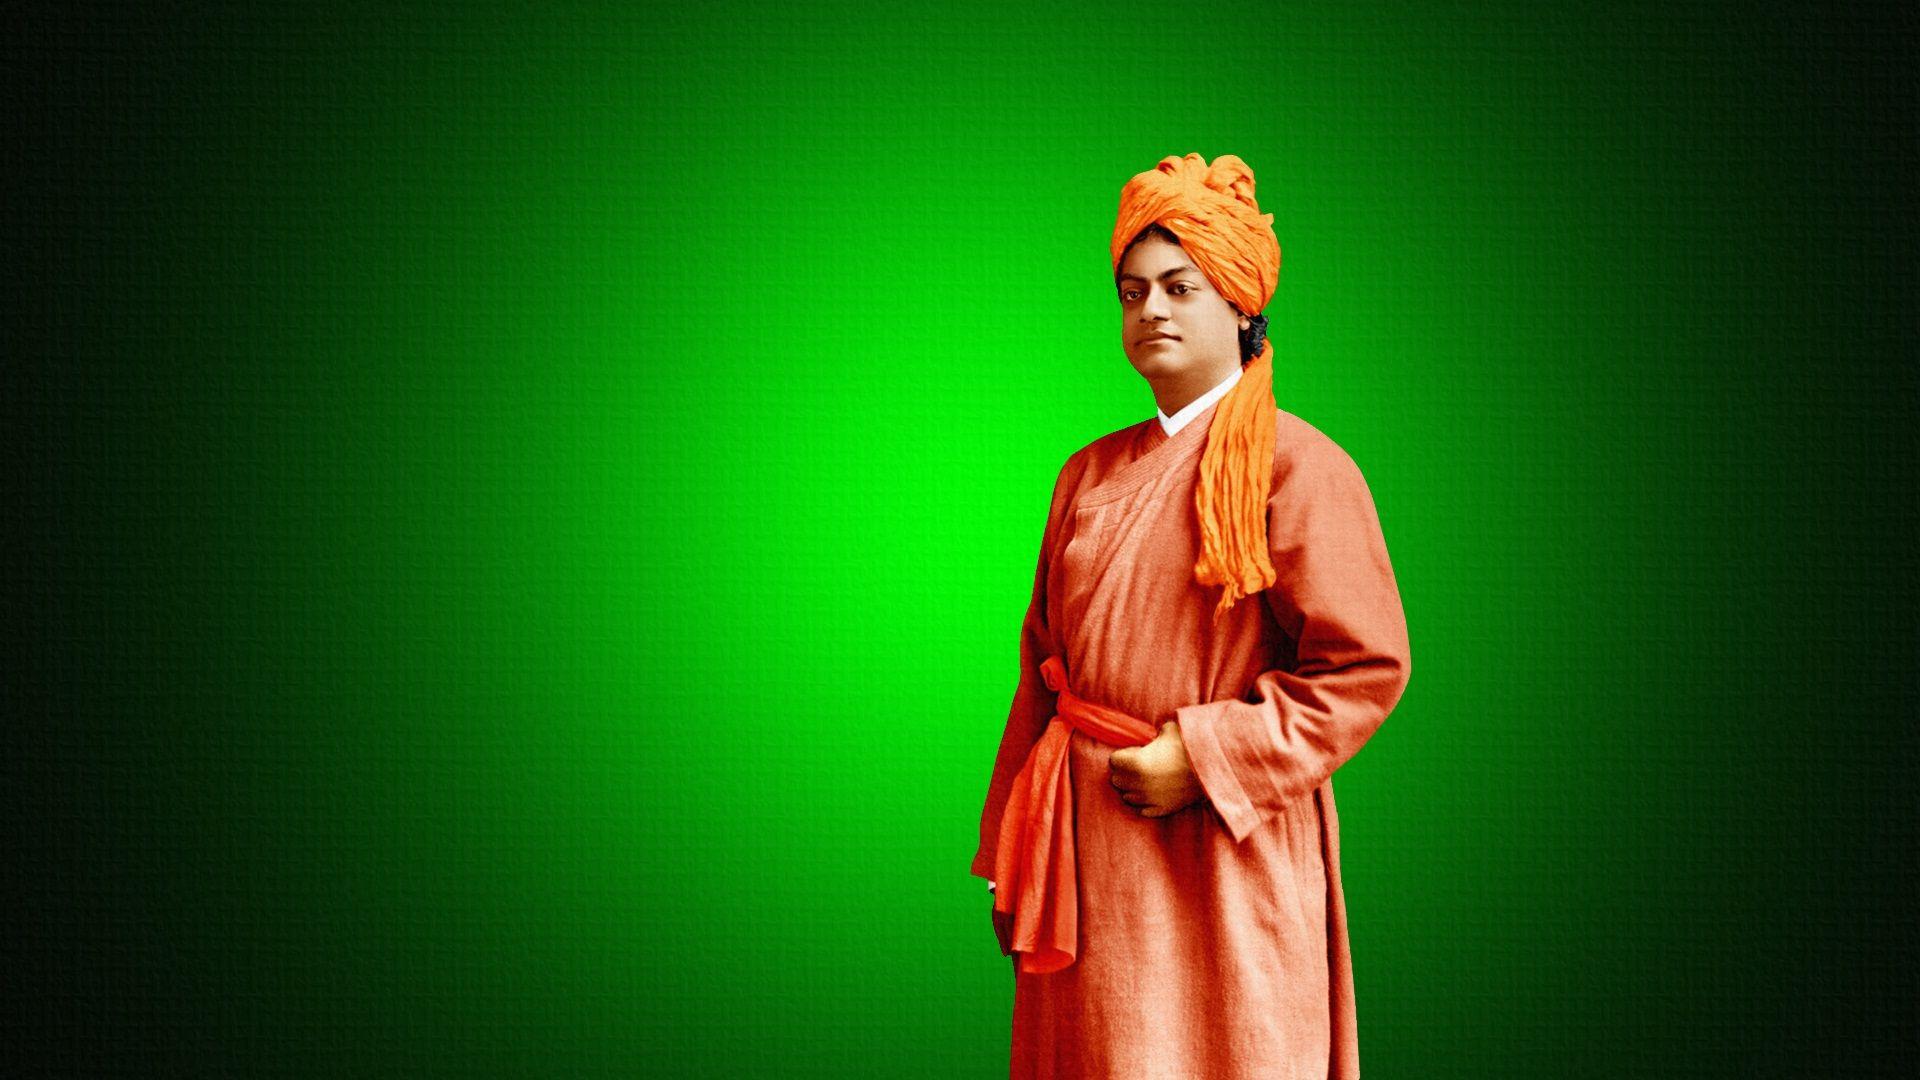 Swami Vivekananda Thoughts: The making of An Ideal Human